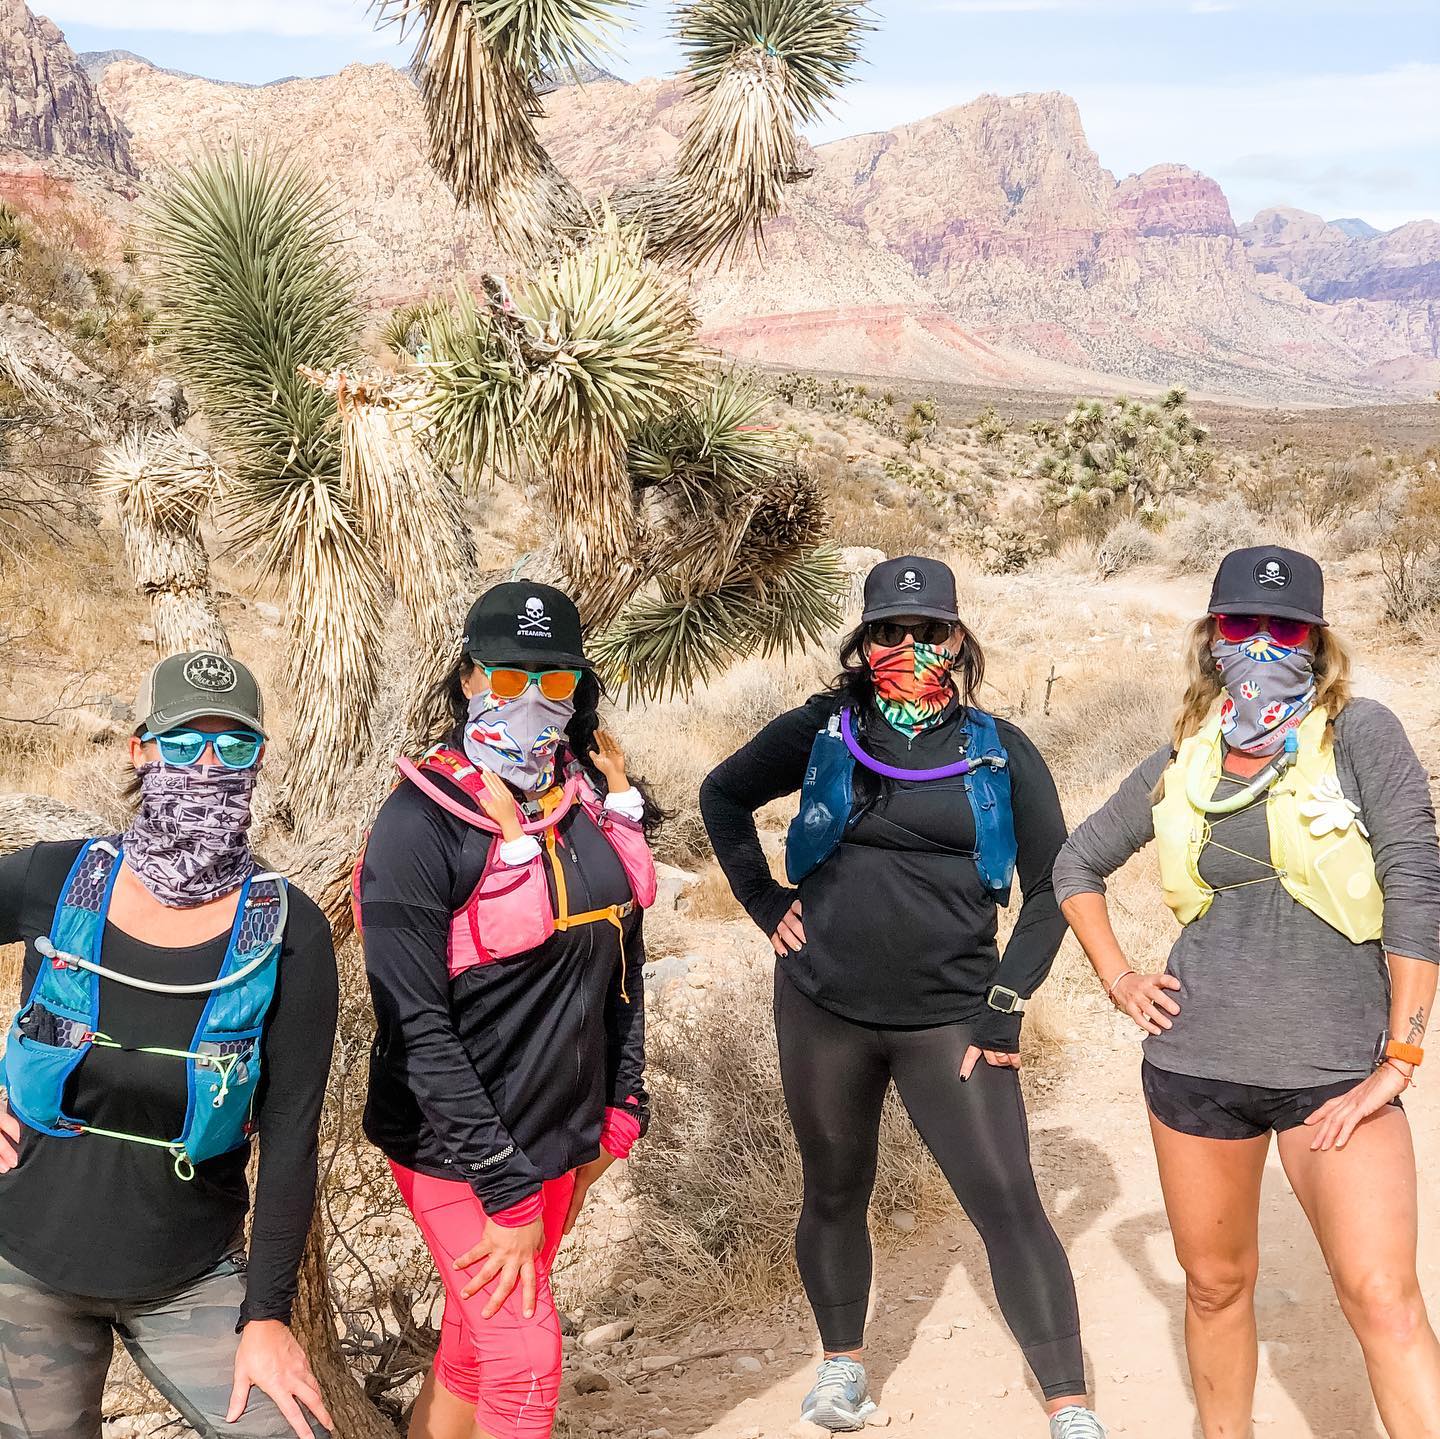 Trail fun, part two. We might’ve taken one-too-many photos (is there even such a thing???) #trailrunningvegas #ultrarunners #runnersofinstagram #trailrunning [instagram]